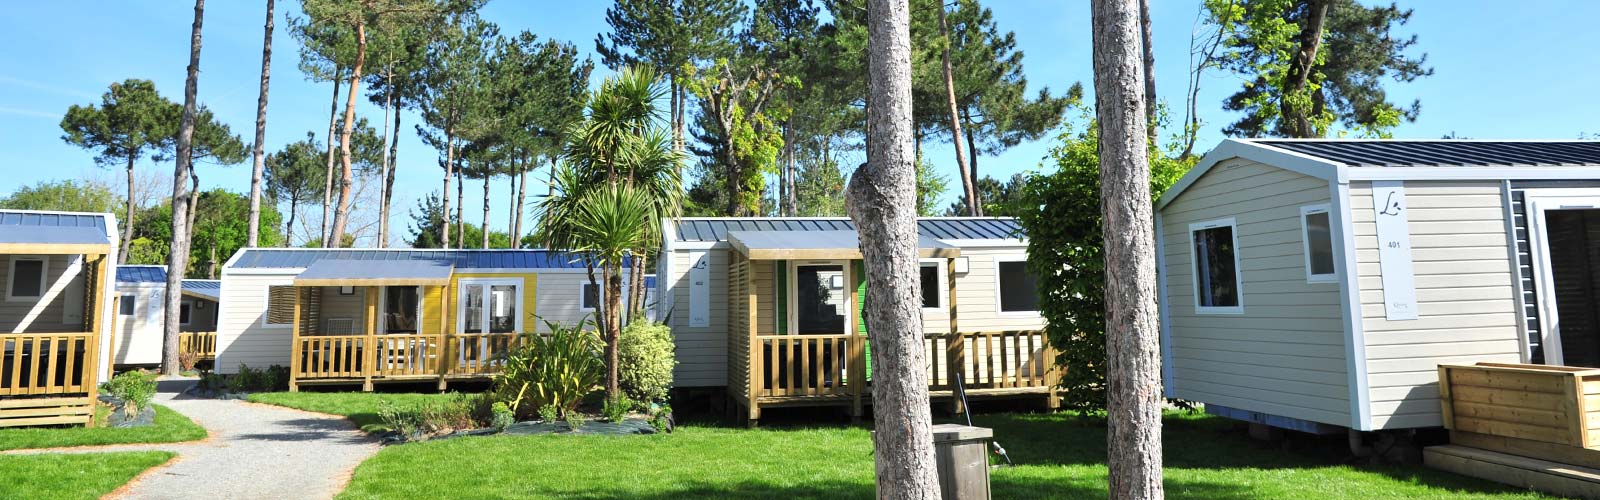 Luxury and comfort mobile homes at Le Fief campsite in Loire-Atlantique